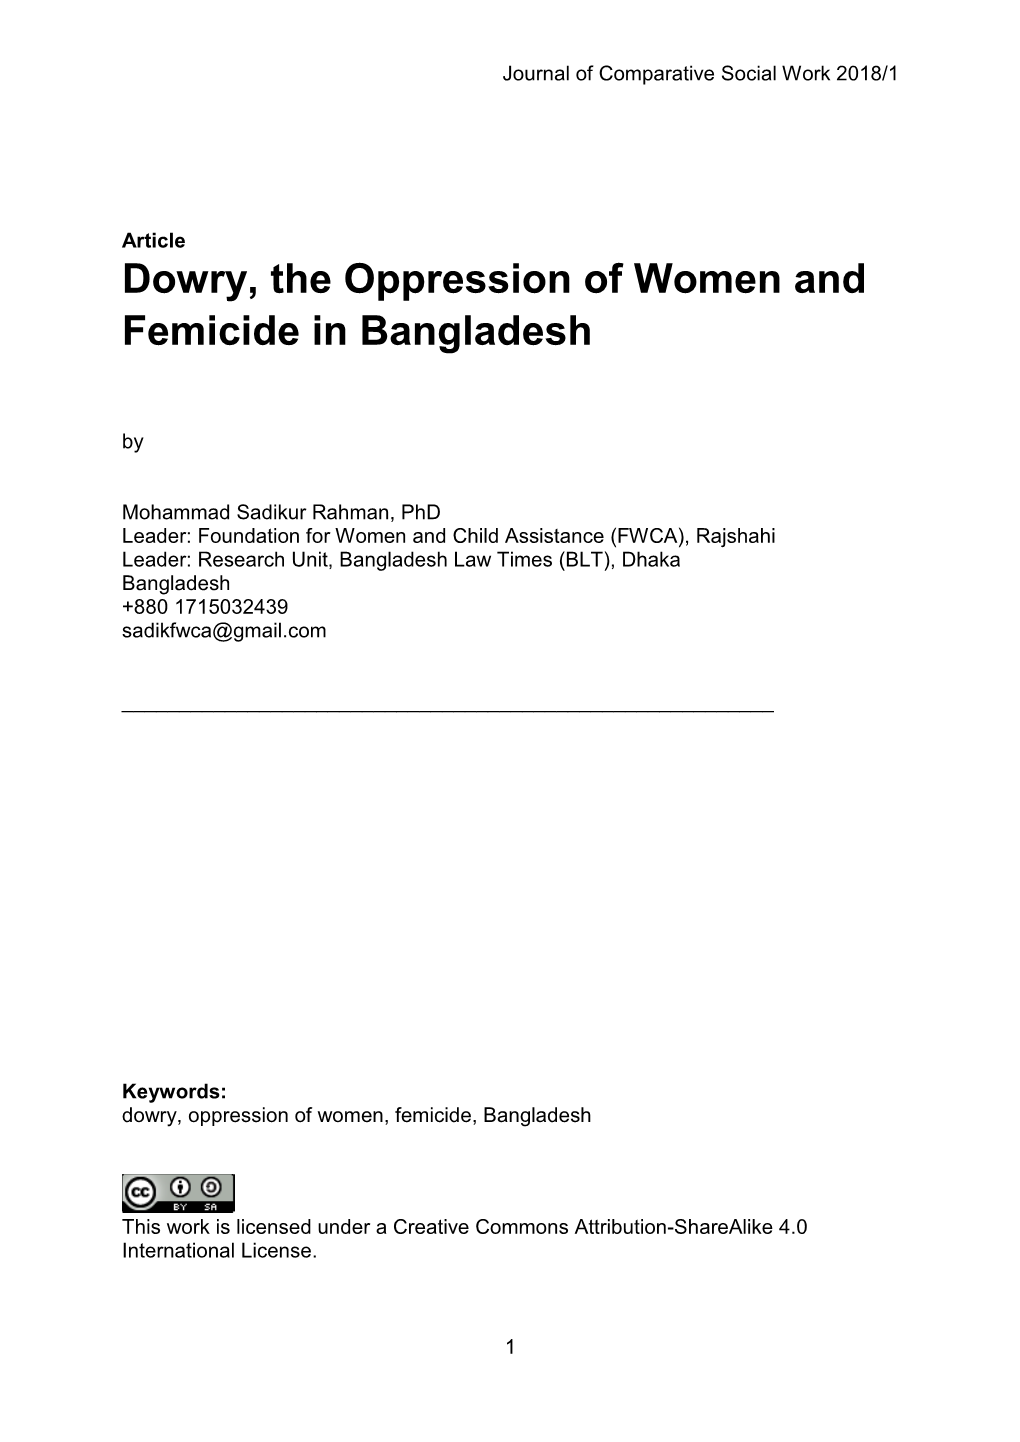 Dowry, the Oppression of Women and Femicide in Bangladesh